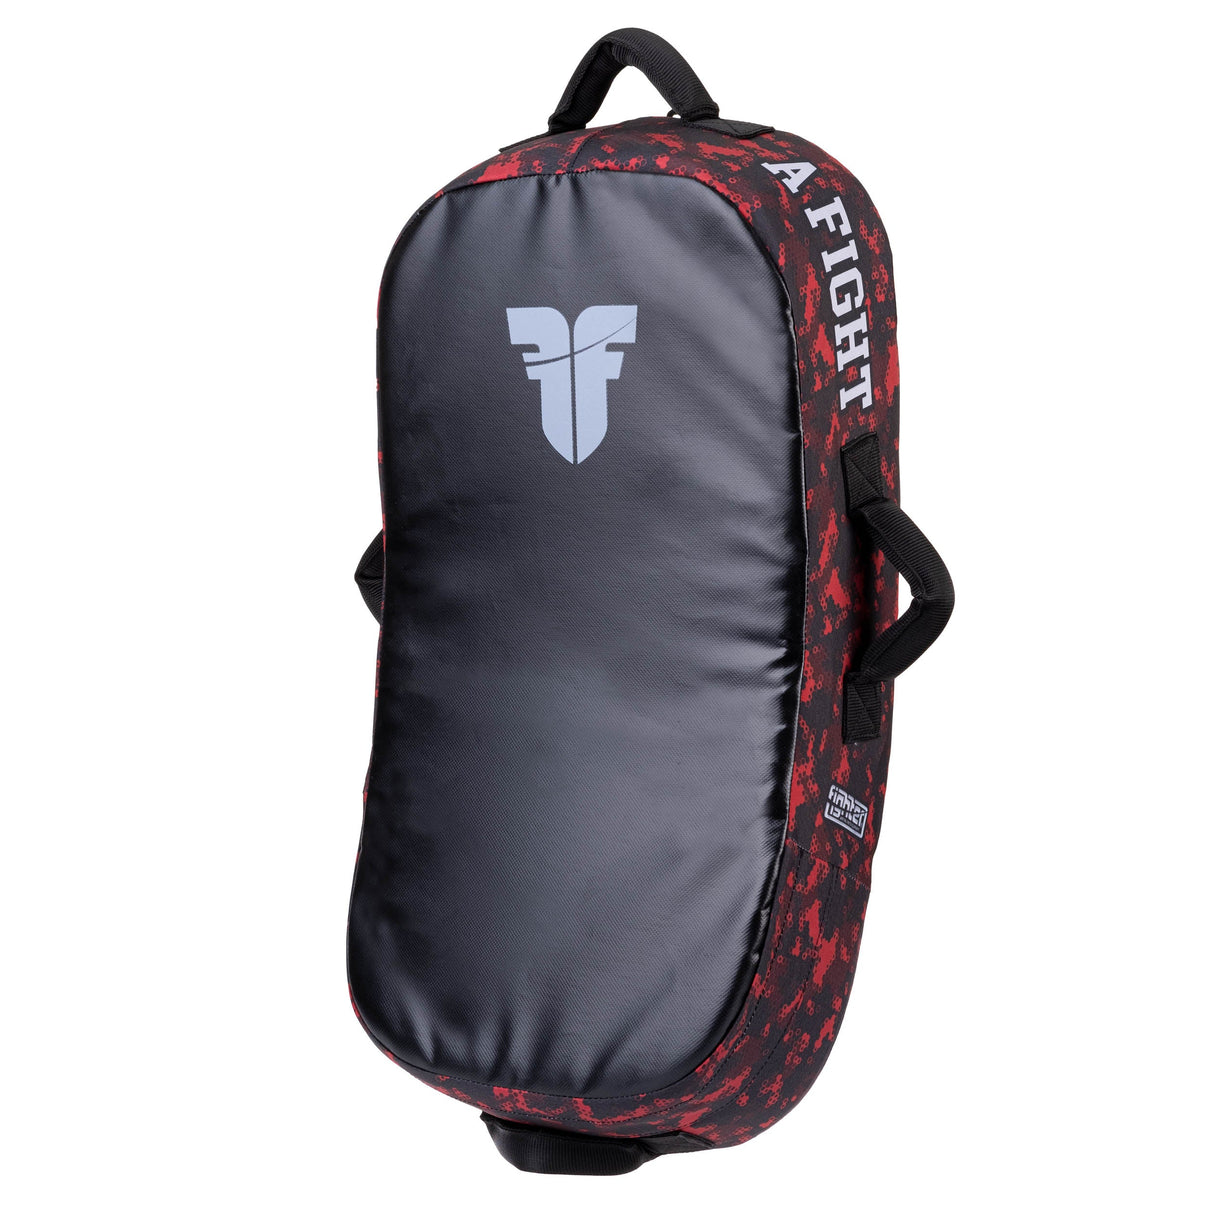 Fighter Trittschild - MULTI GRIP - Life is a Fight - Rotes Camo, FKSH-26